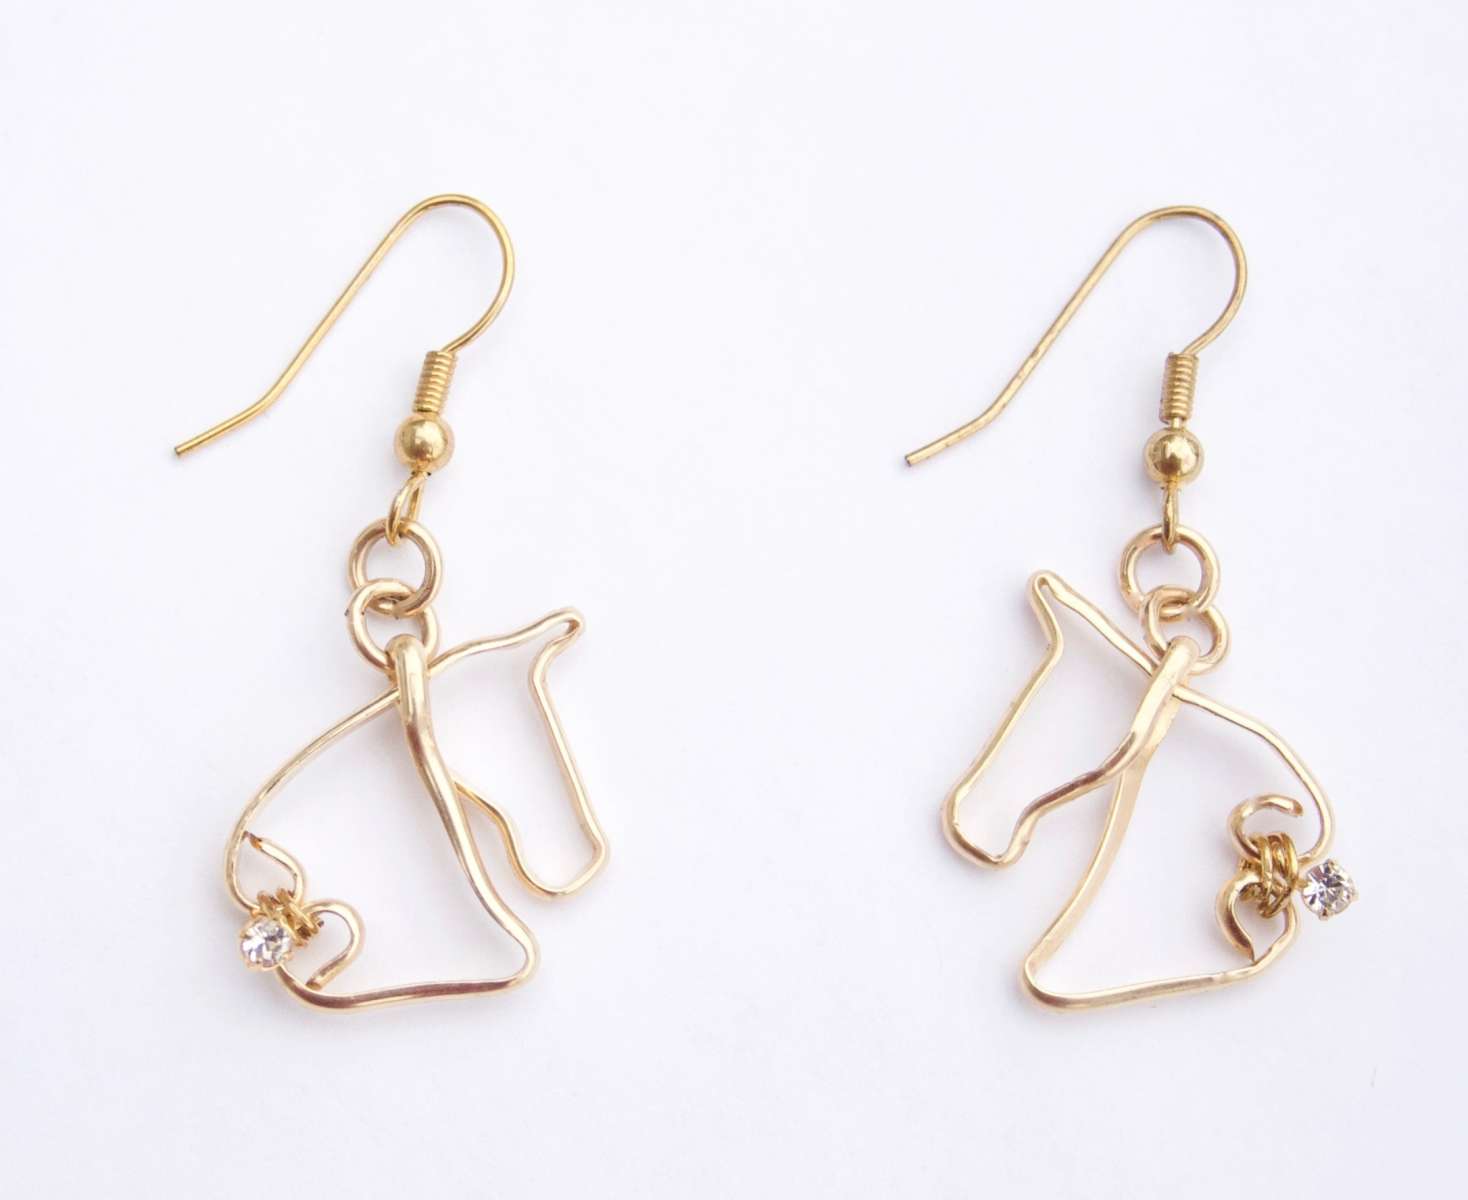 Petite Horse Head earrings, gold-filled with Swarovski crystals